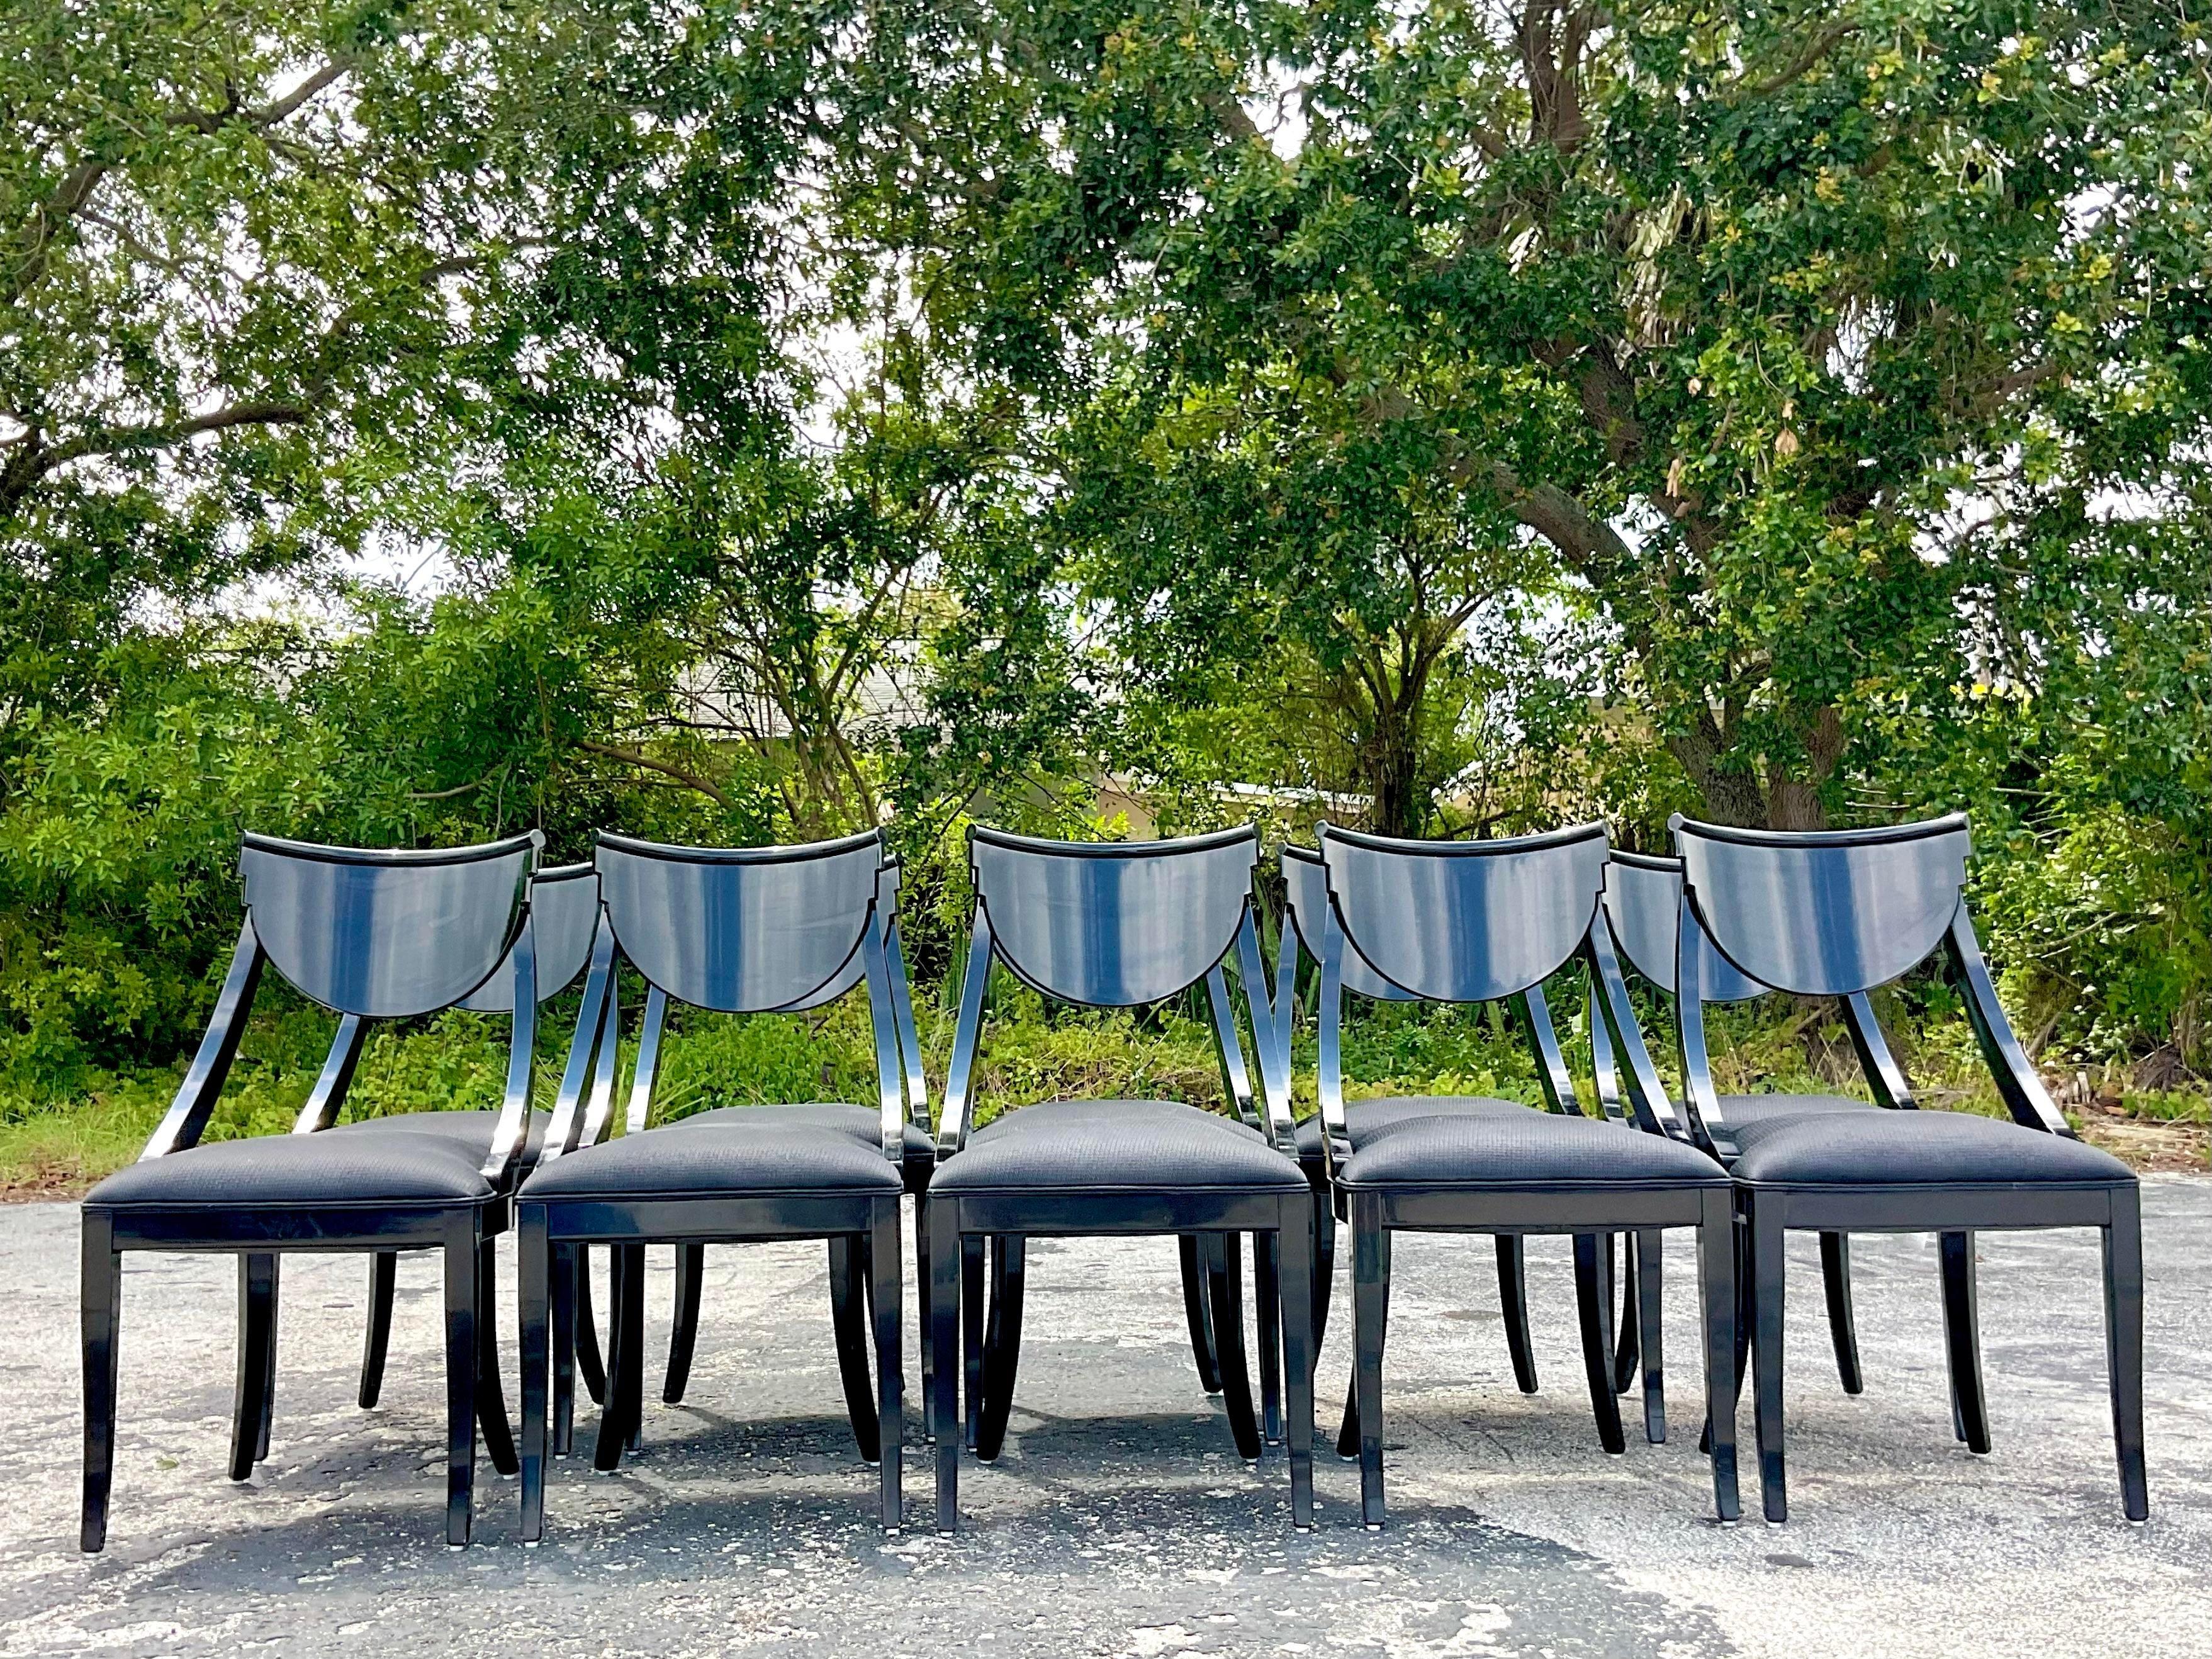 Vintage Italian Pietro Constantini Black Lacquered Kilsmos Chairs - Set of 10 In Good Condition For Sale In west palm beach, FL